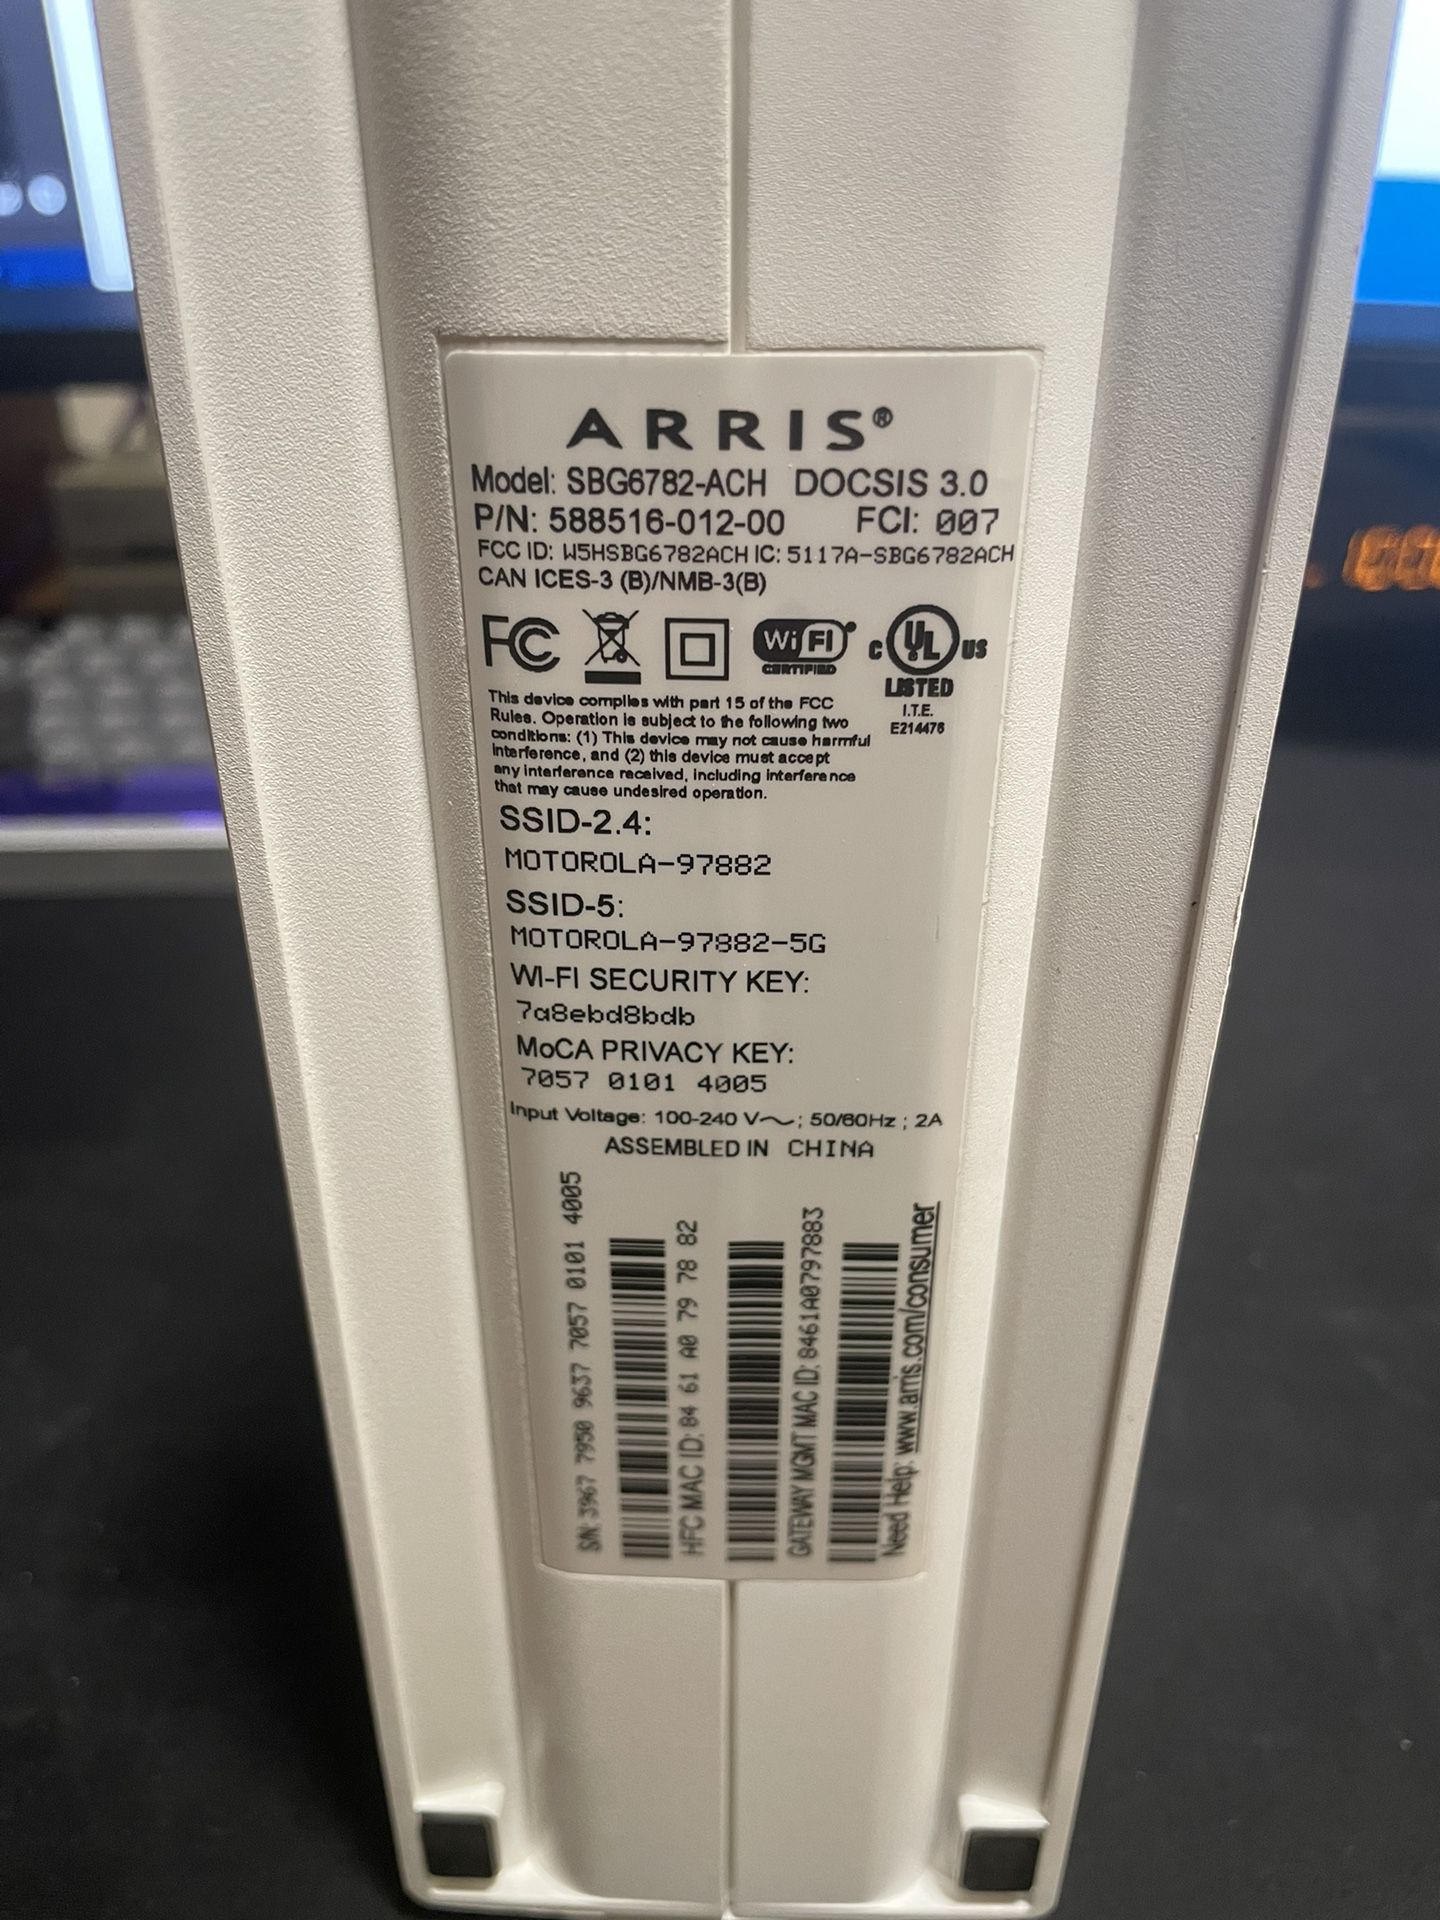 Arris SURFboard DOCSIS 3.0 Cable Modem With WiFi